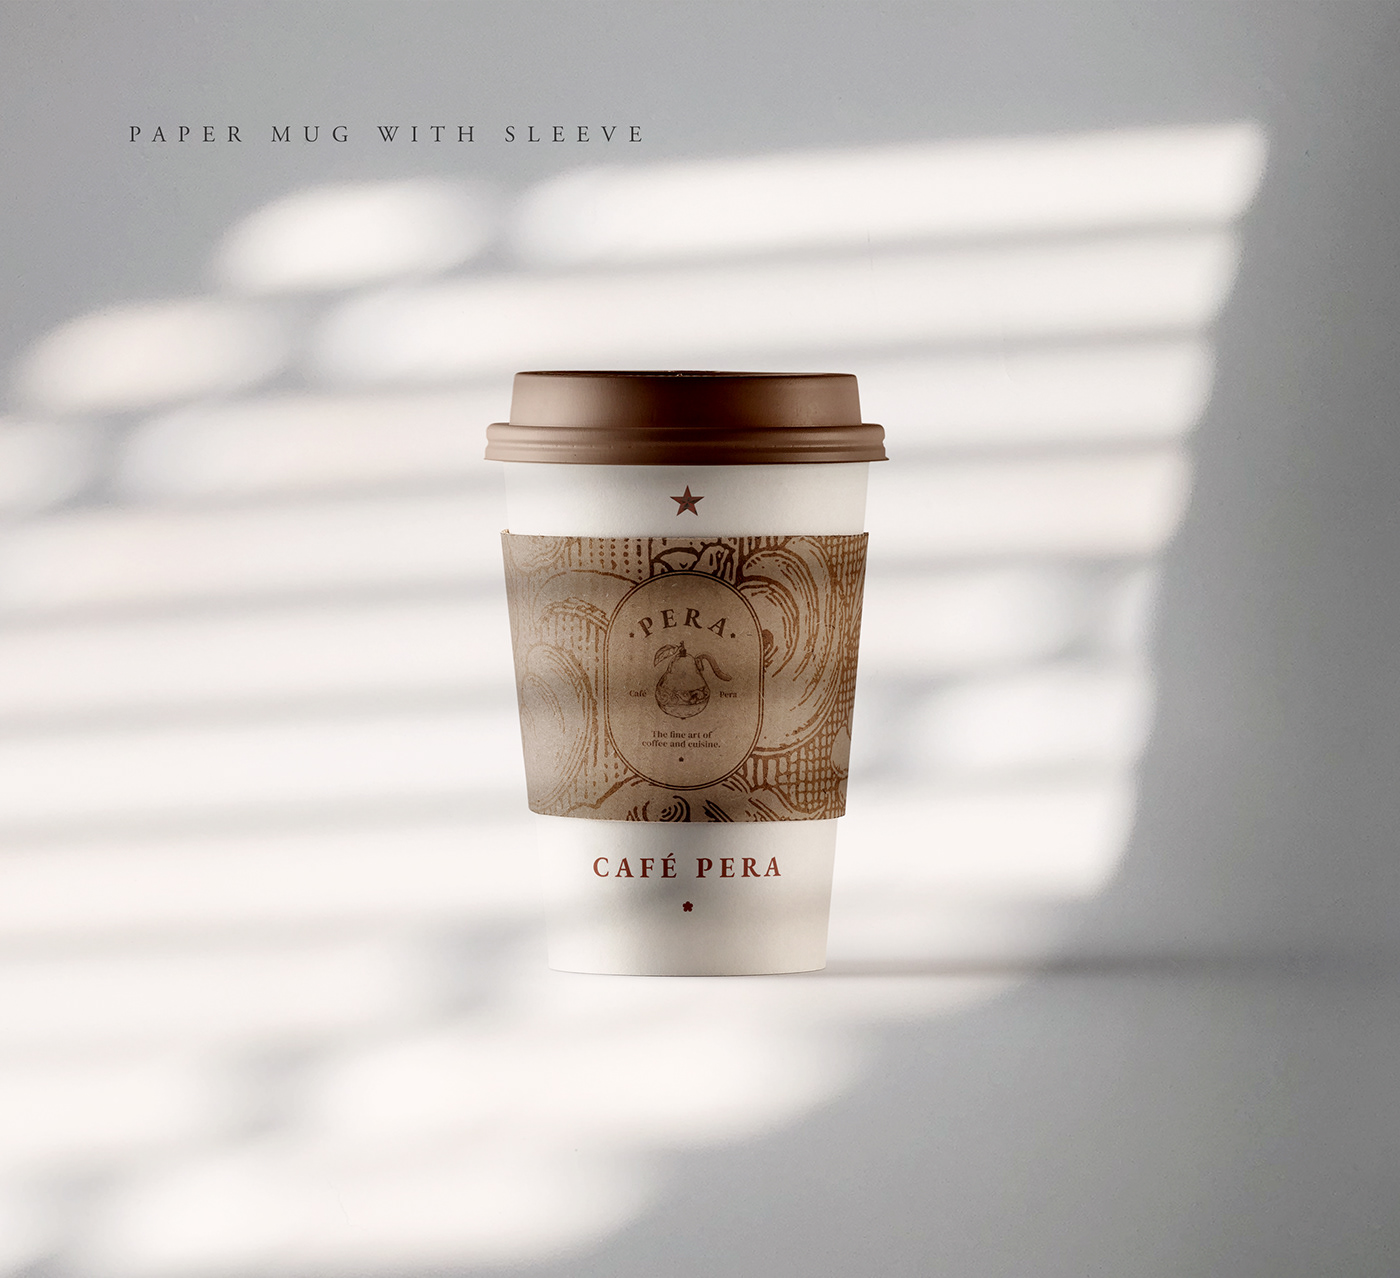 paper cup
coffee cups
cup
cup with sleeve
craft
shadow
cafe branding
hot drink
decorative
vintage 